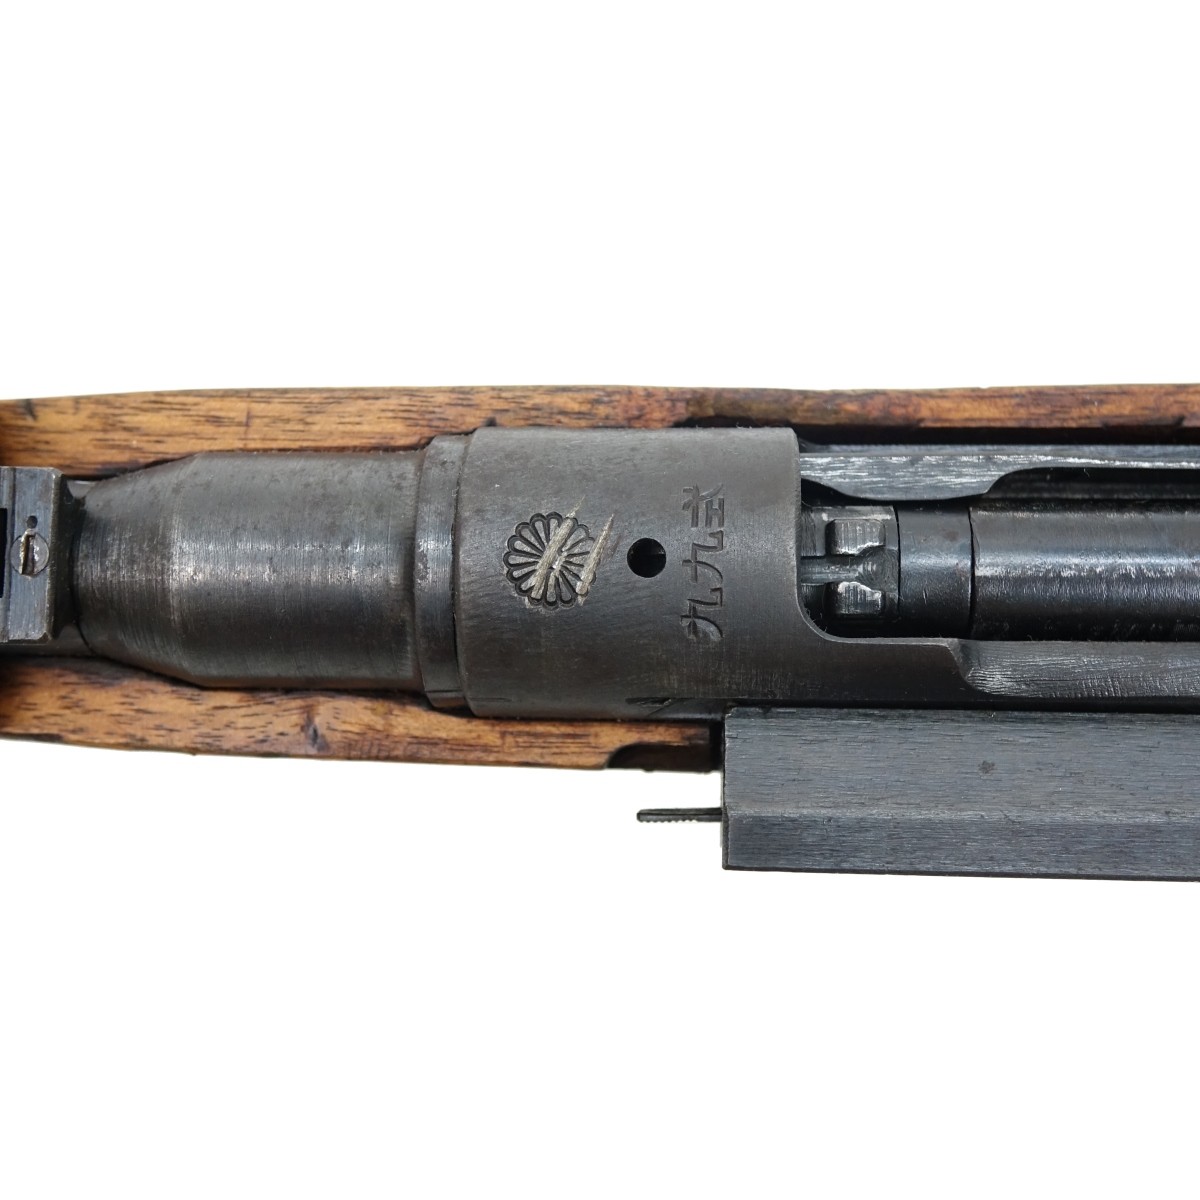 Japanese WWII Rifle with Bayonet and Knife